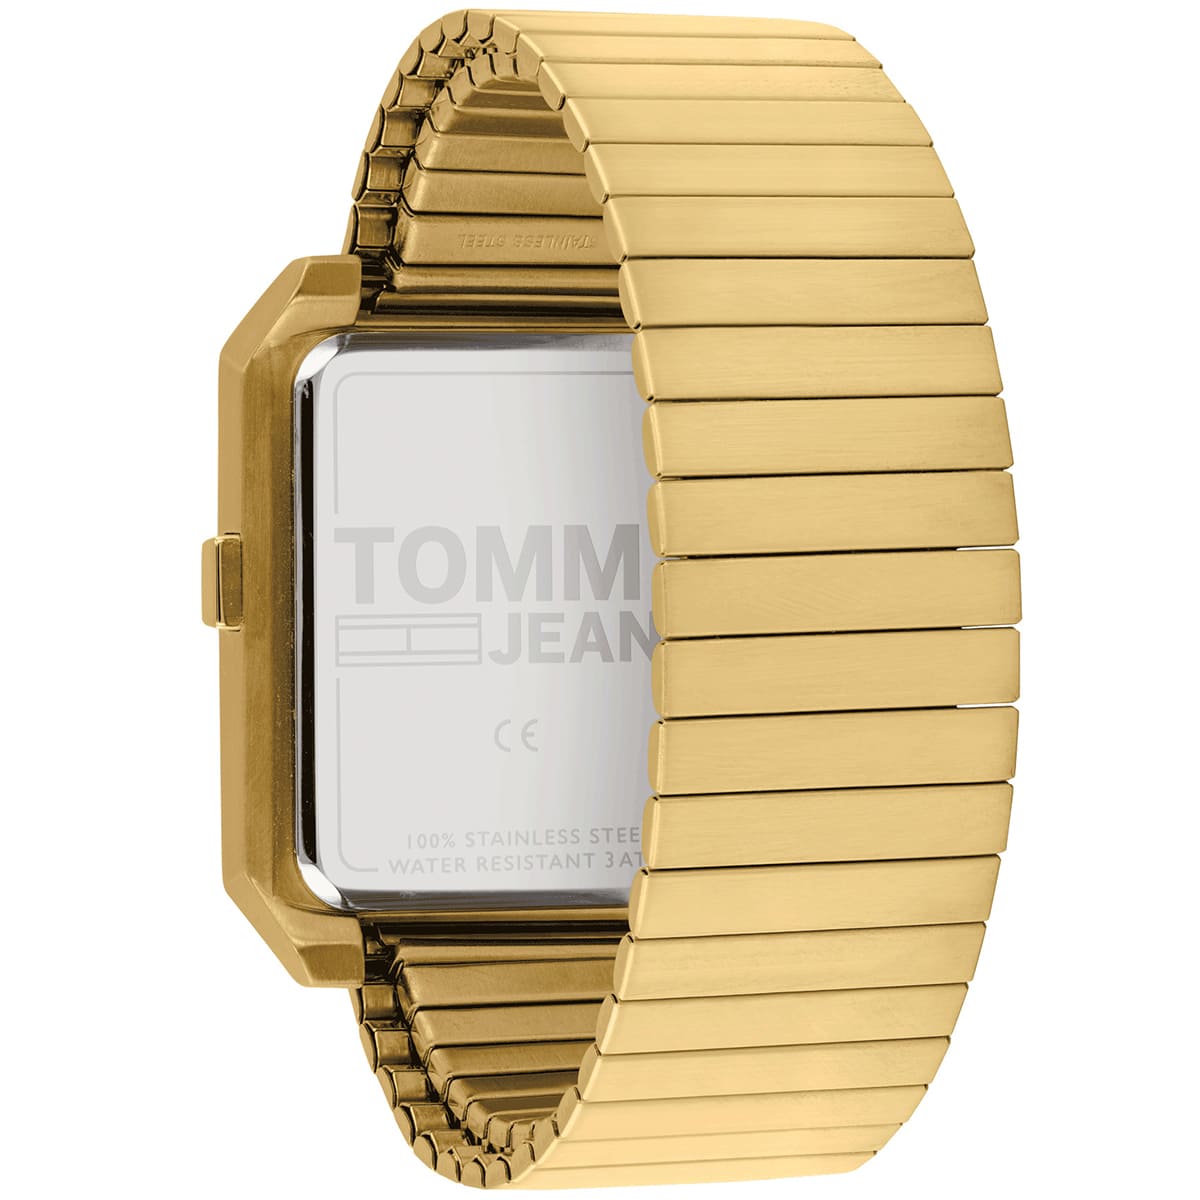 Tommy Hilfiger Men Watch Jeans 1791670 | Watches Prime